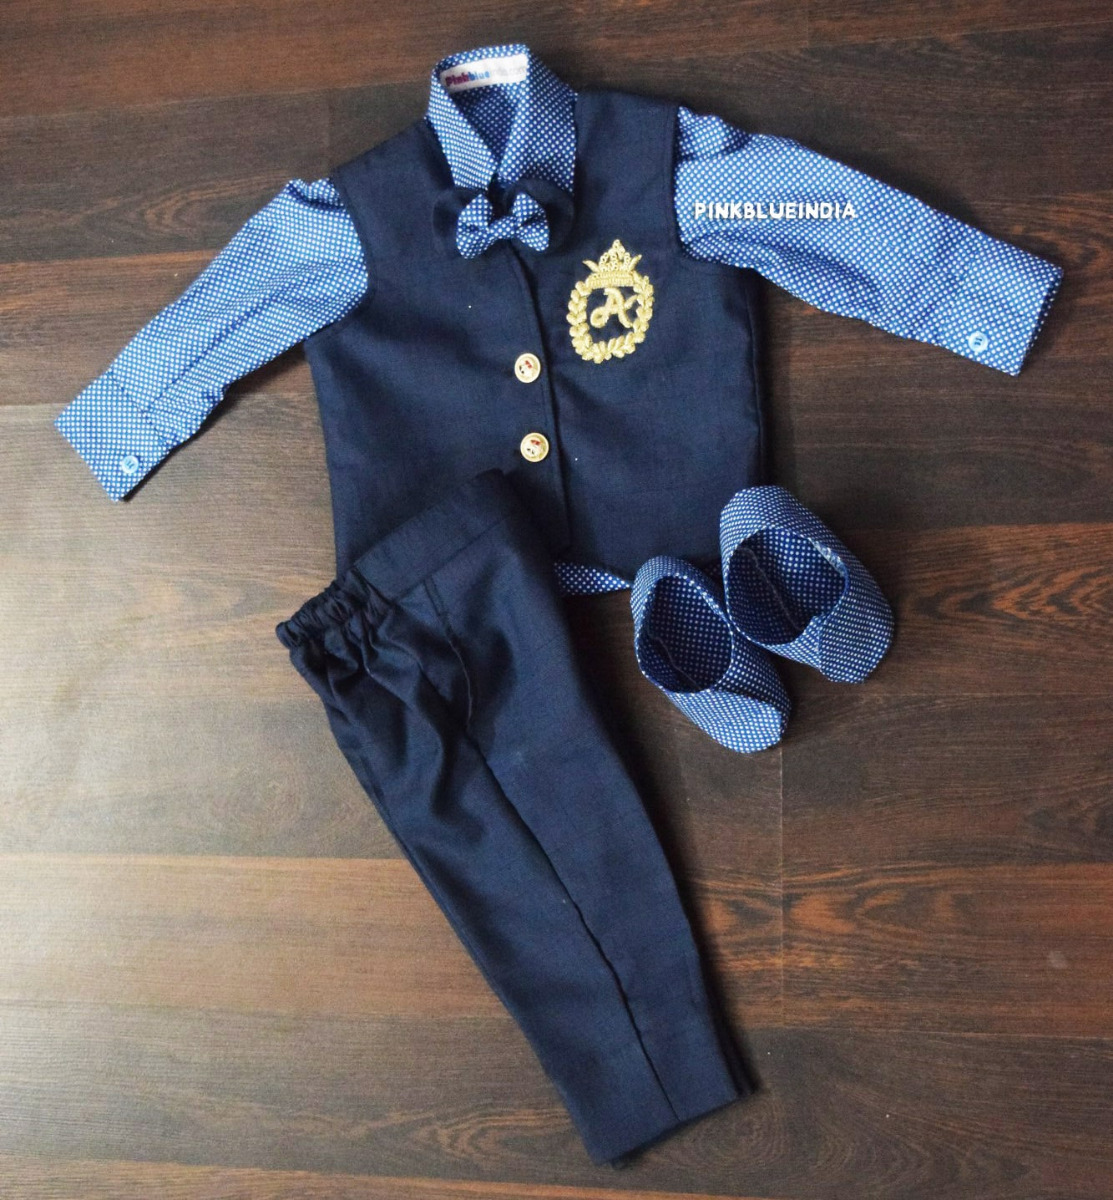 Buy the Most Popular Boy 1st Birthday Party Outfit Online